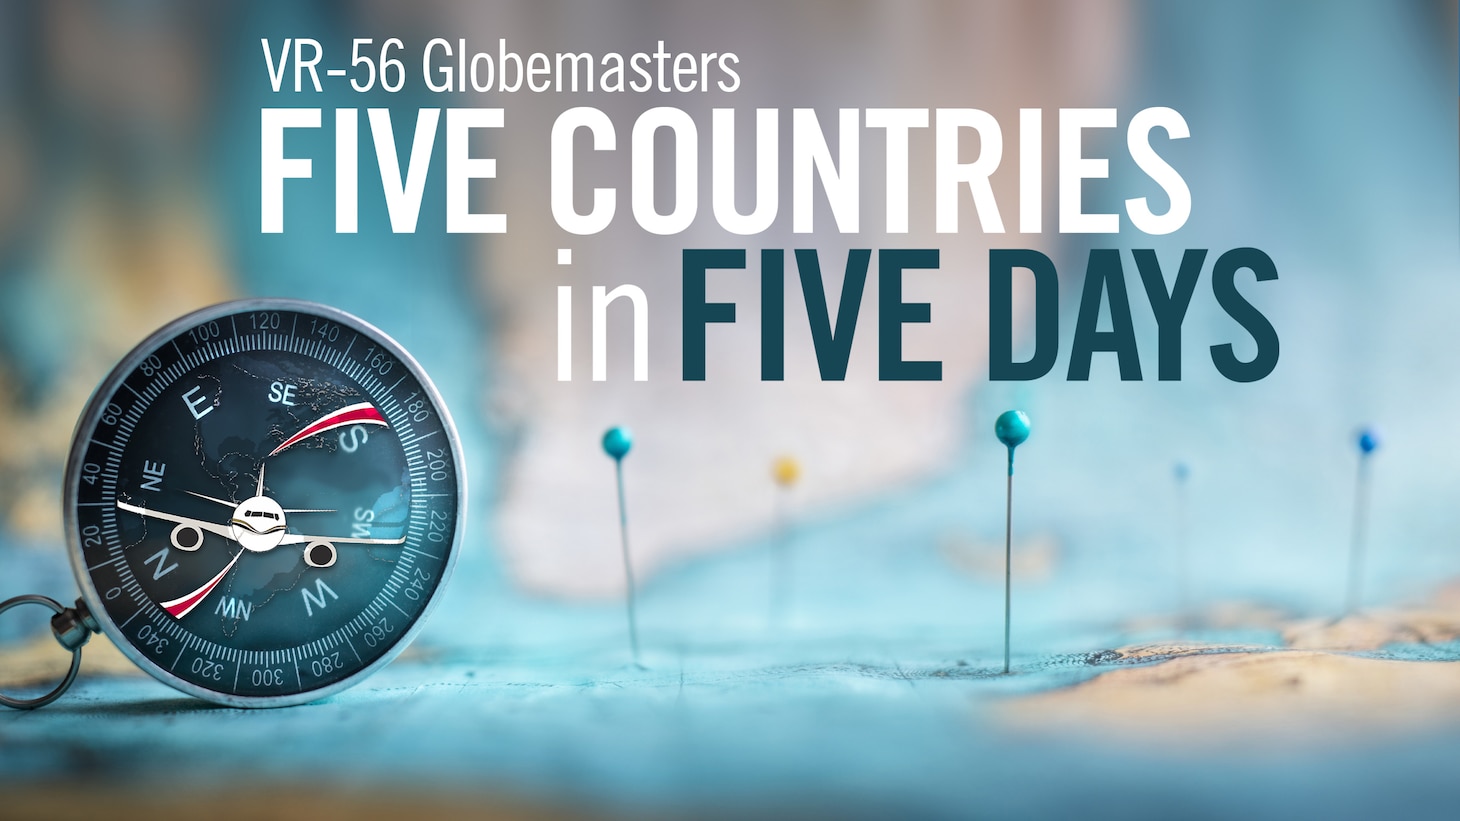 VR-56 Globemasters Five Countries in Five Days (MCC Stephen Hickok)